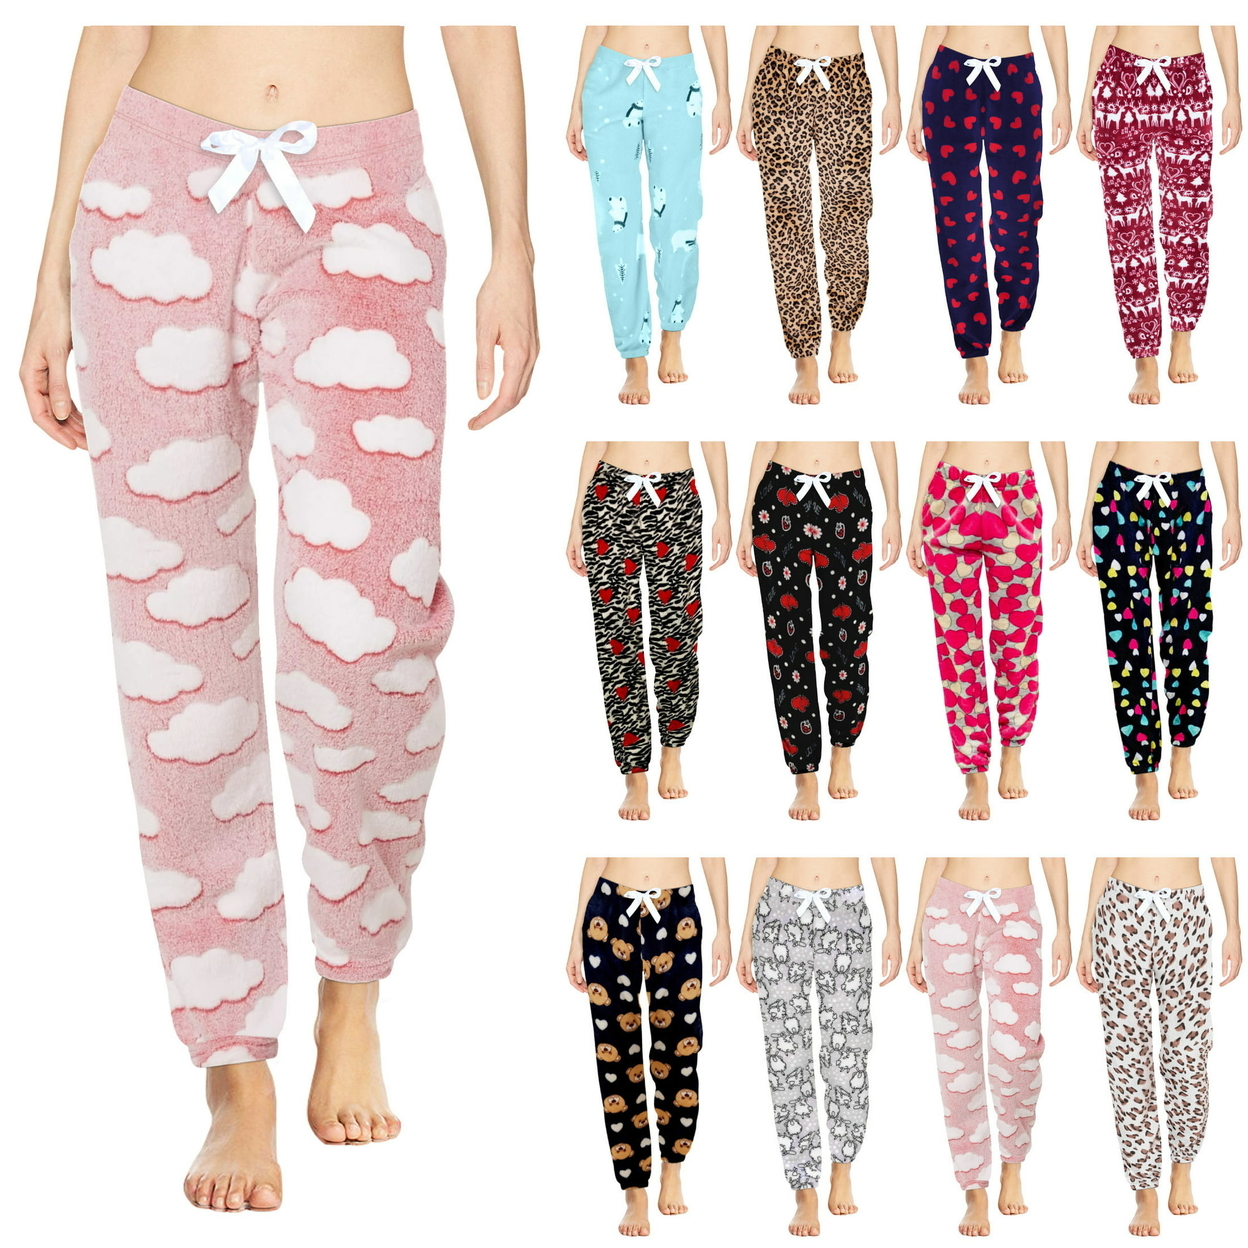 3-Pack: Women's Solid & Printed Ultra-Soft Comfy Stretch Micro-Fleece Pajama Lounge Pants - X-large, Shapes